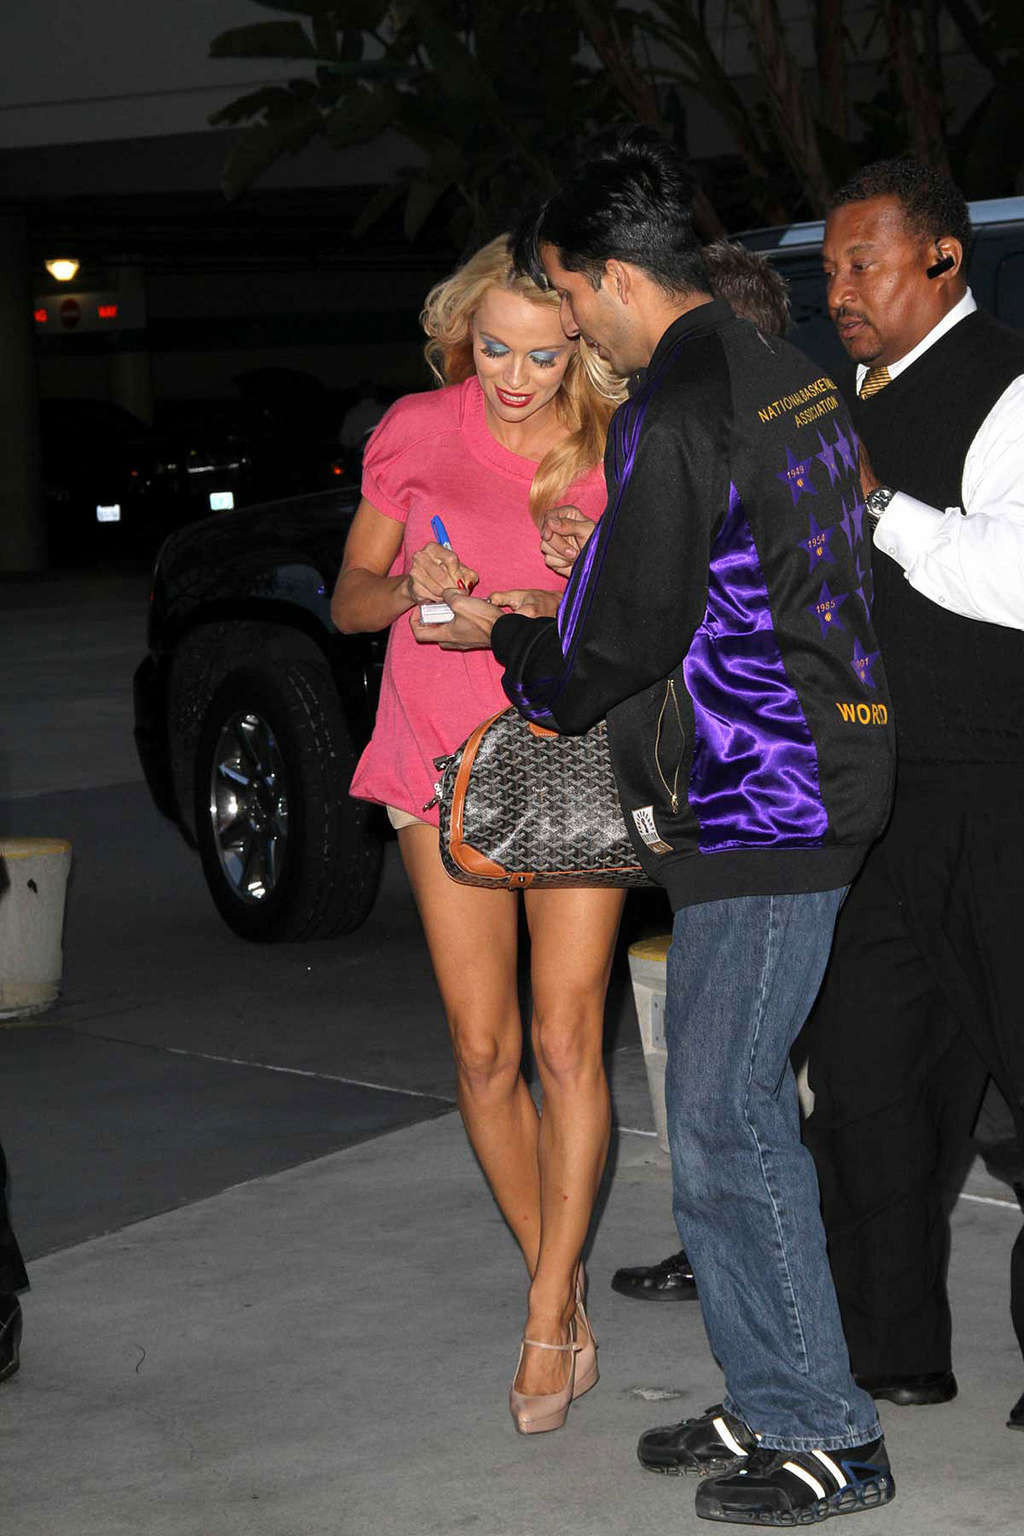 Pamela Anderson in Baywacth swimsuit and leggy in shorts #75351048